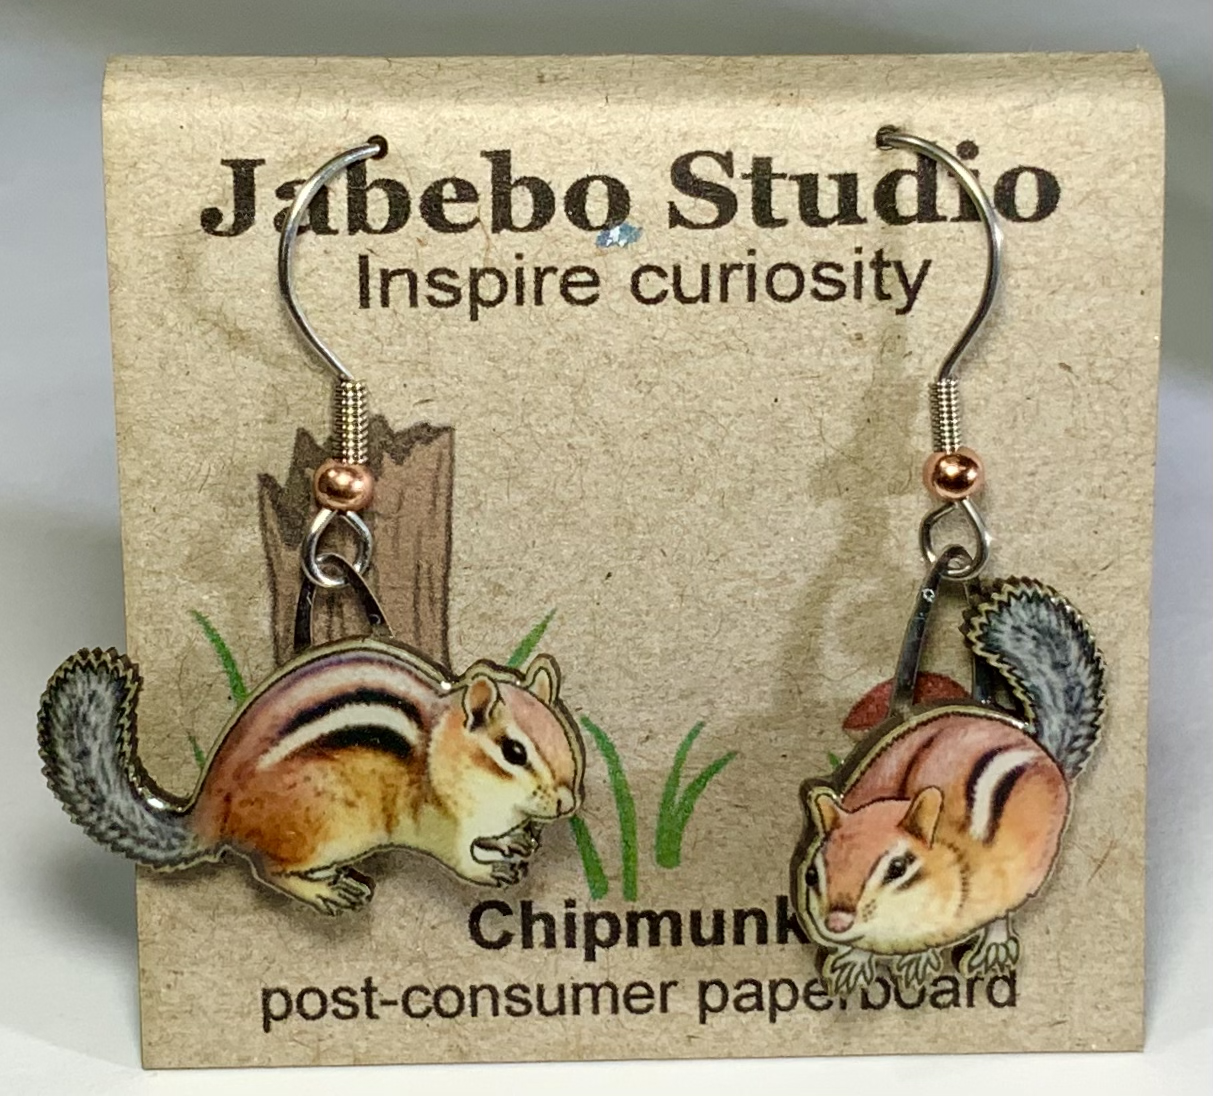 Picture shown is of 1 inch tall pair of earrings of the animal the Chipmunk.